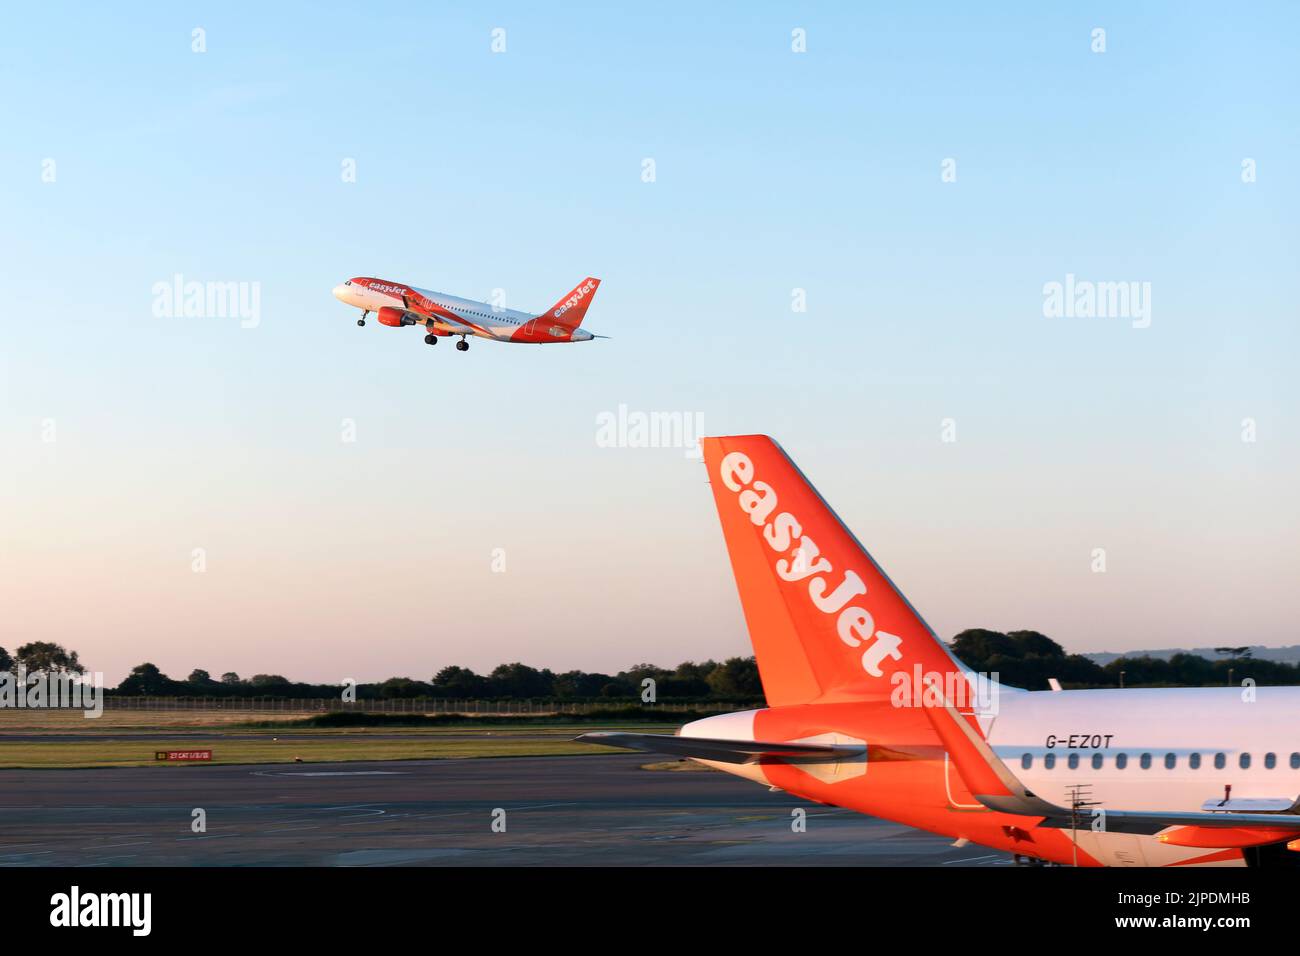 An EasyJet plane taking off from Bristol airport.  Another EasyJet plane is parked on the runway. The companies logo and branding are clearly shown. Stock Photo